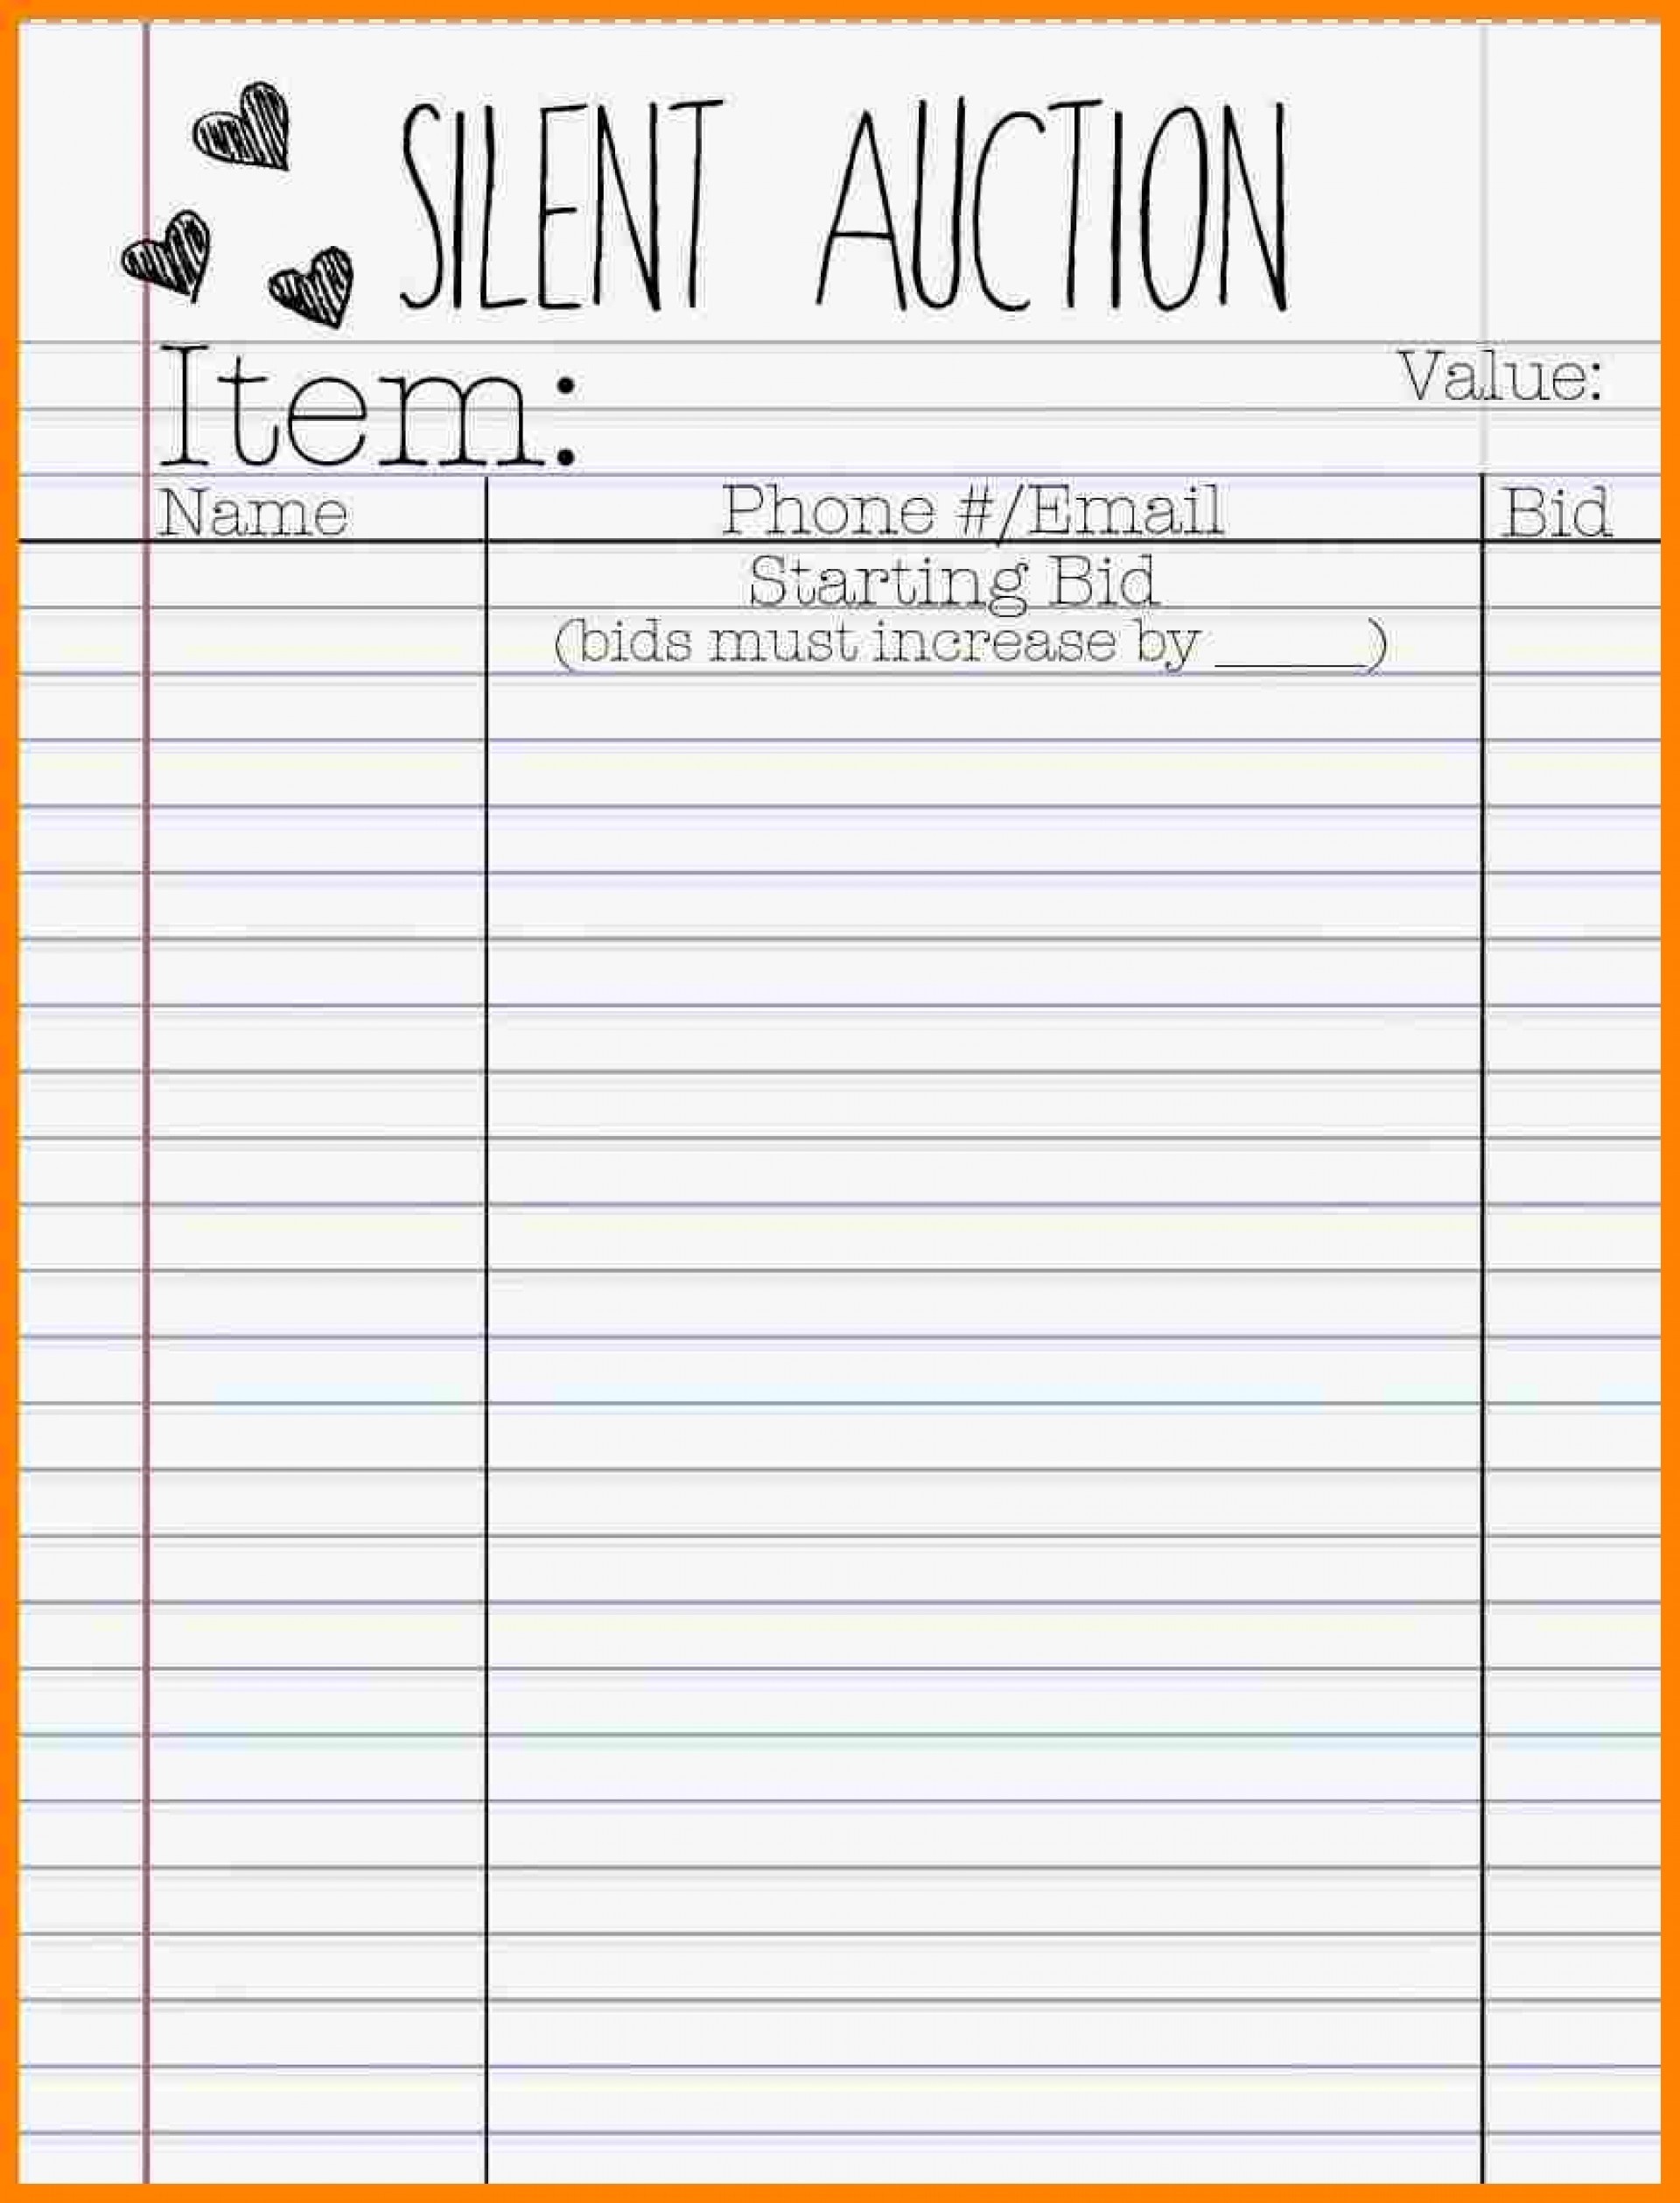 Bid Sheet Templates For Silent Auction (In Word, Excel, Pdf Format